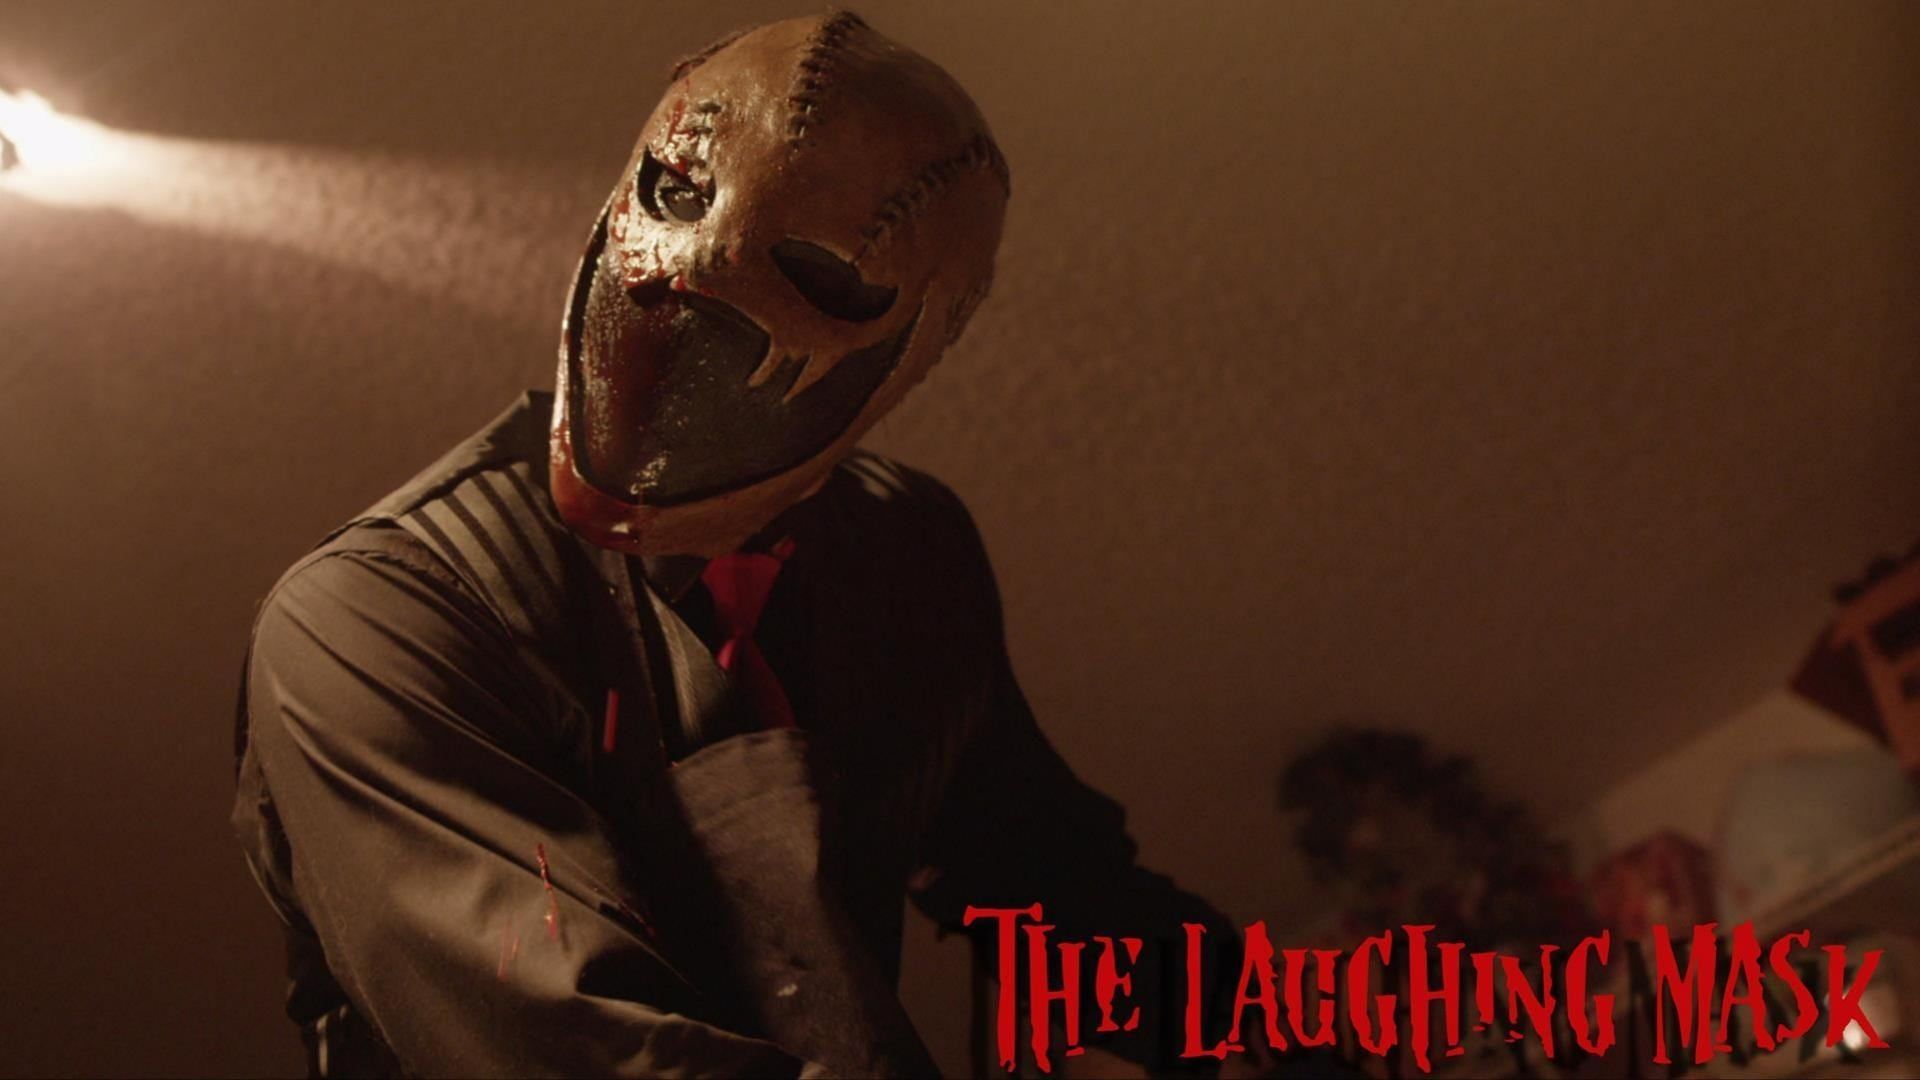 The Laughing Mask background